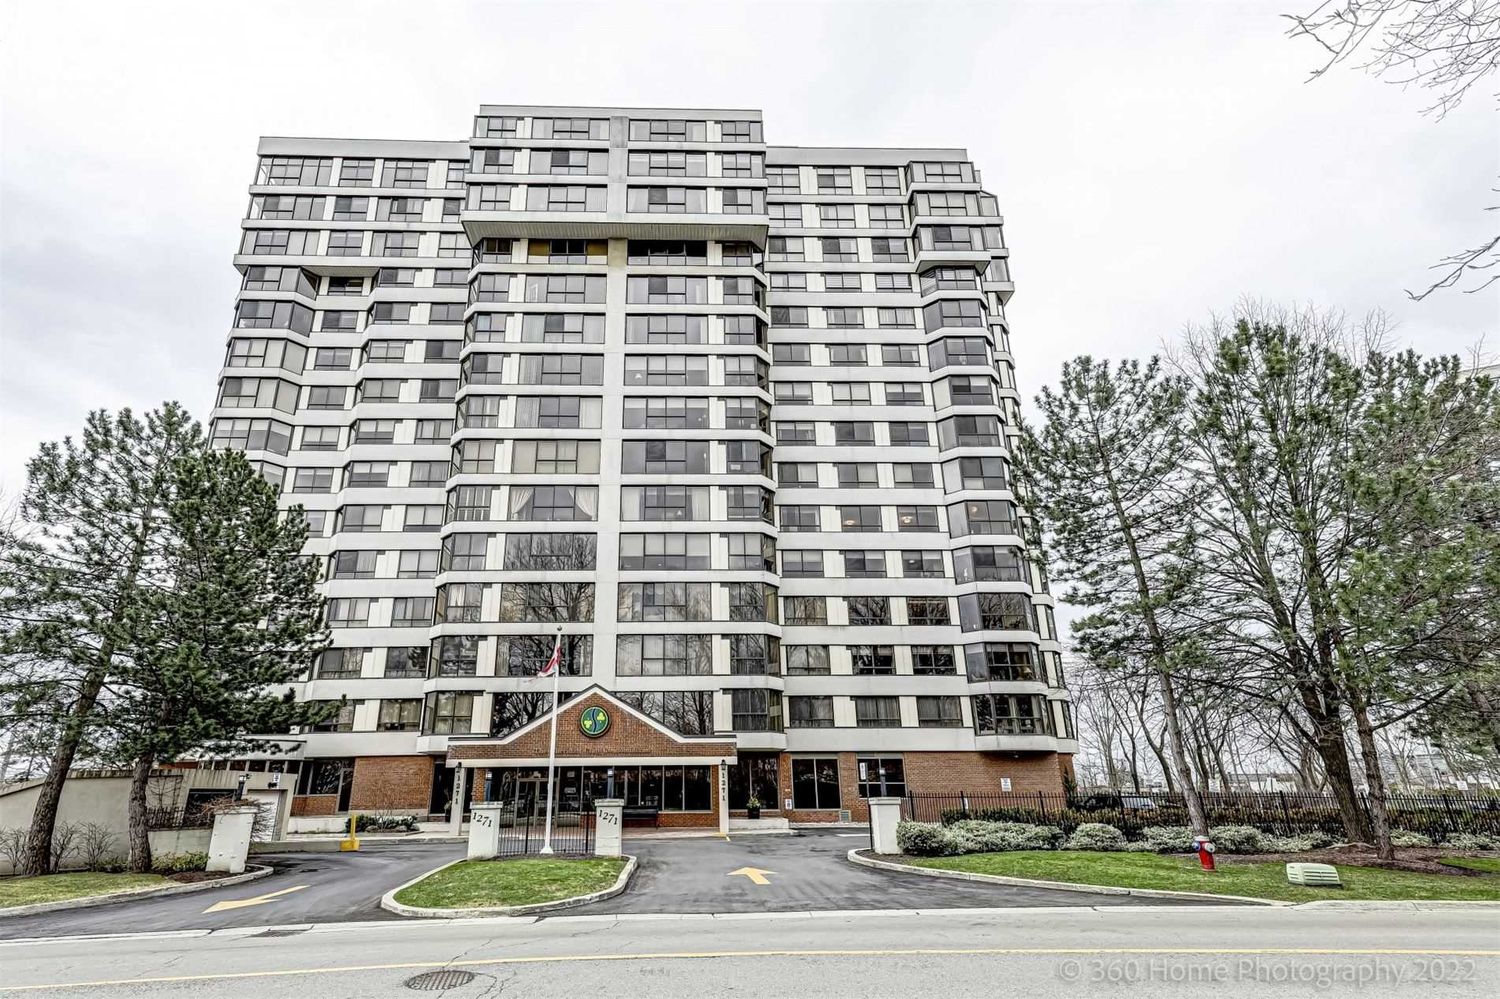 1271 Walden Cir. Sheridan Club Condos is located in  Mississauga, Toronto - image #1 of 3